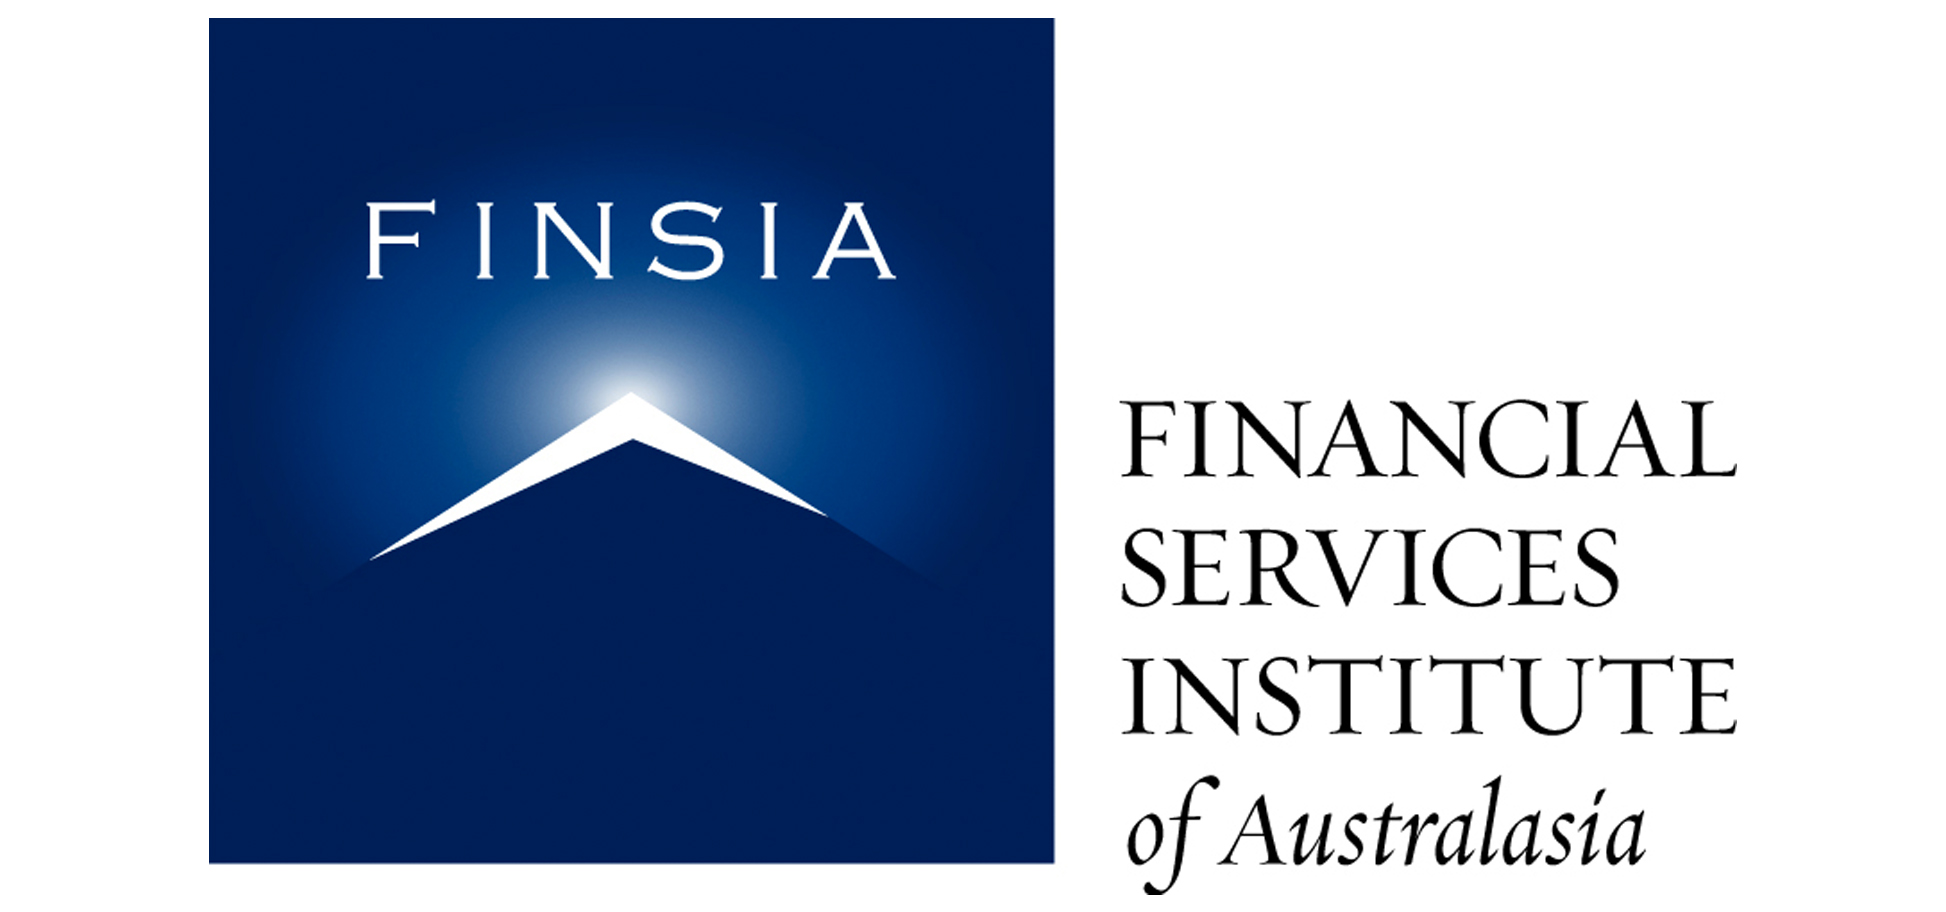  Be eligible for admission as a Senior Associate of FINSIA